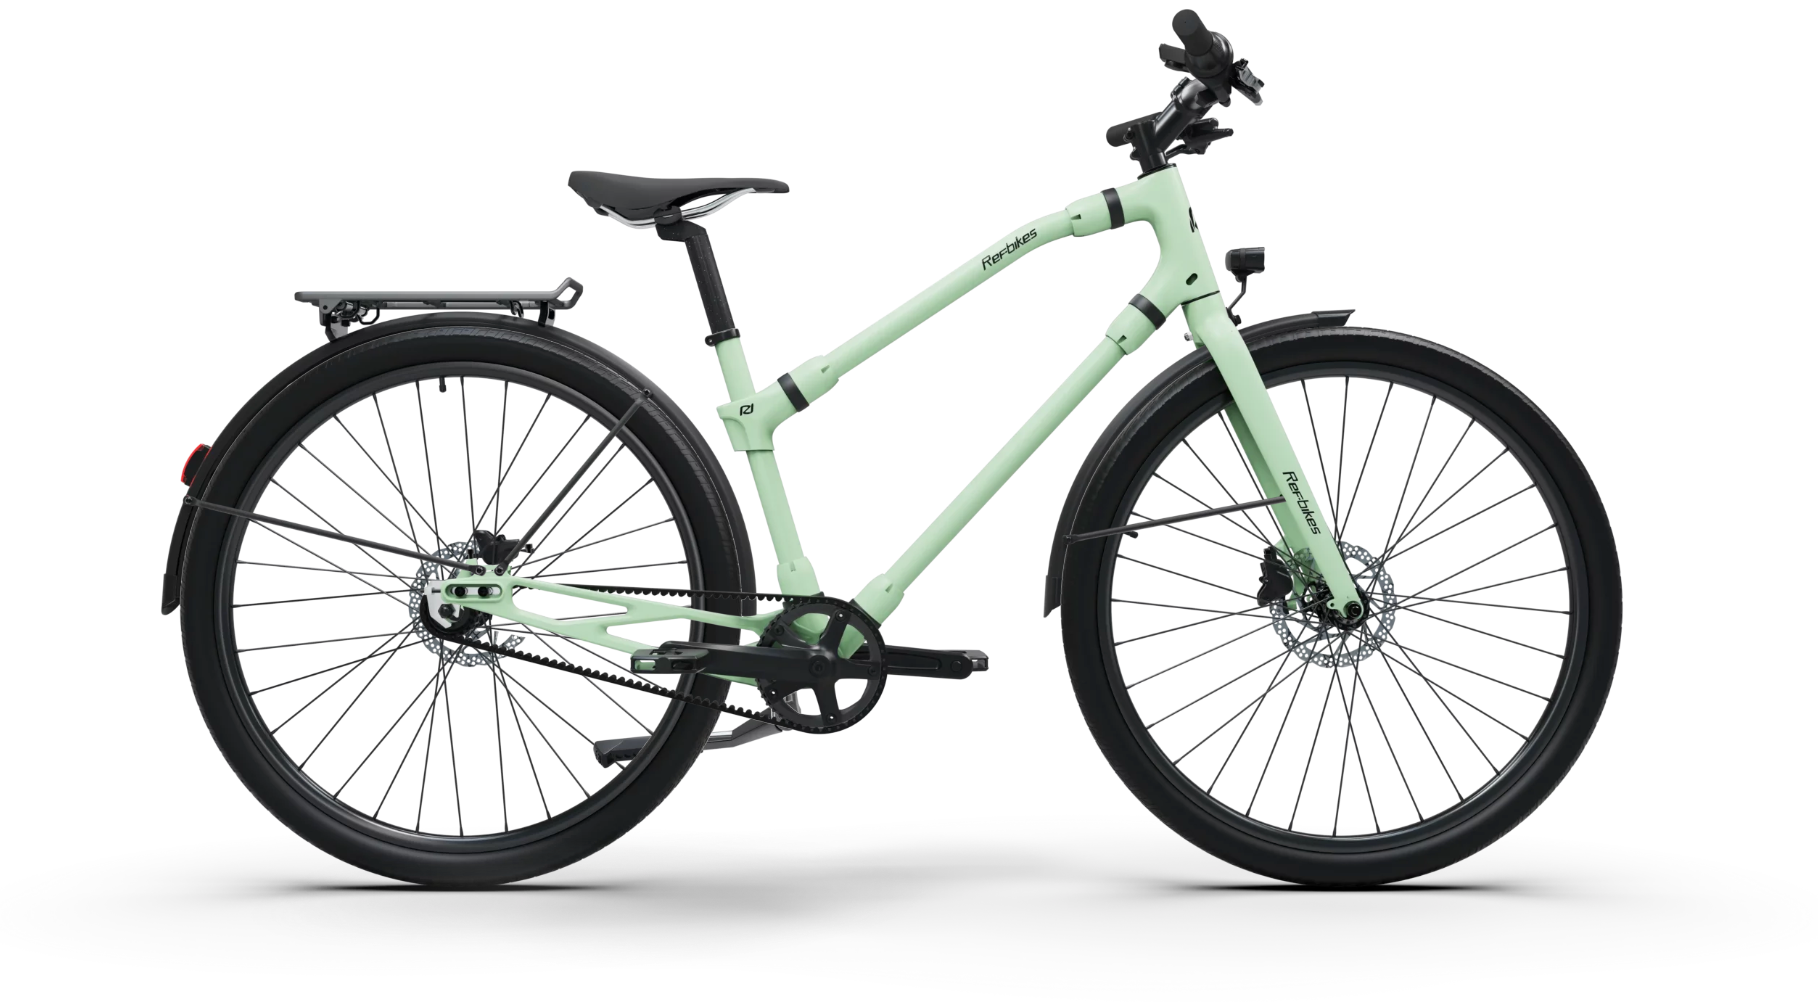 Mint green Ref Urban bike, combining modern aesthetics with sustainable transportation for an active lifestyle.